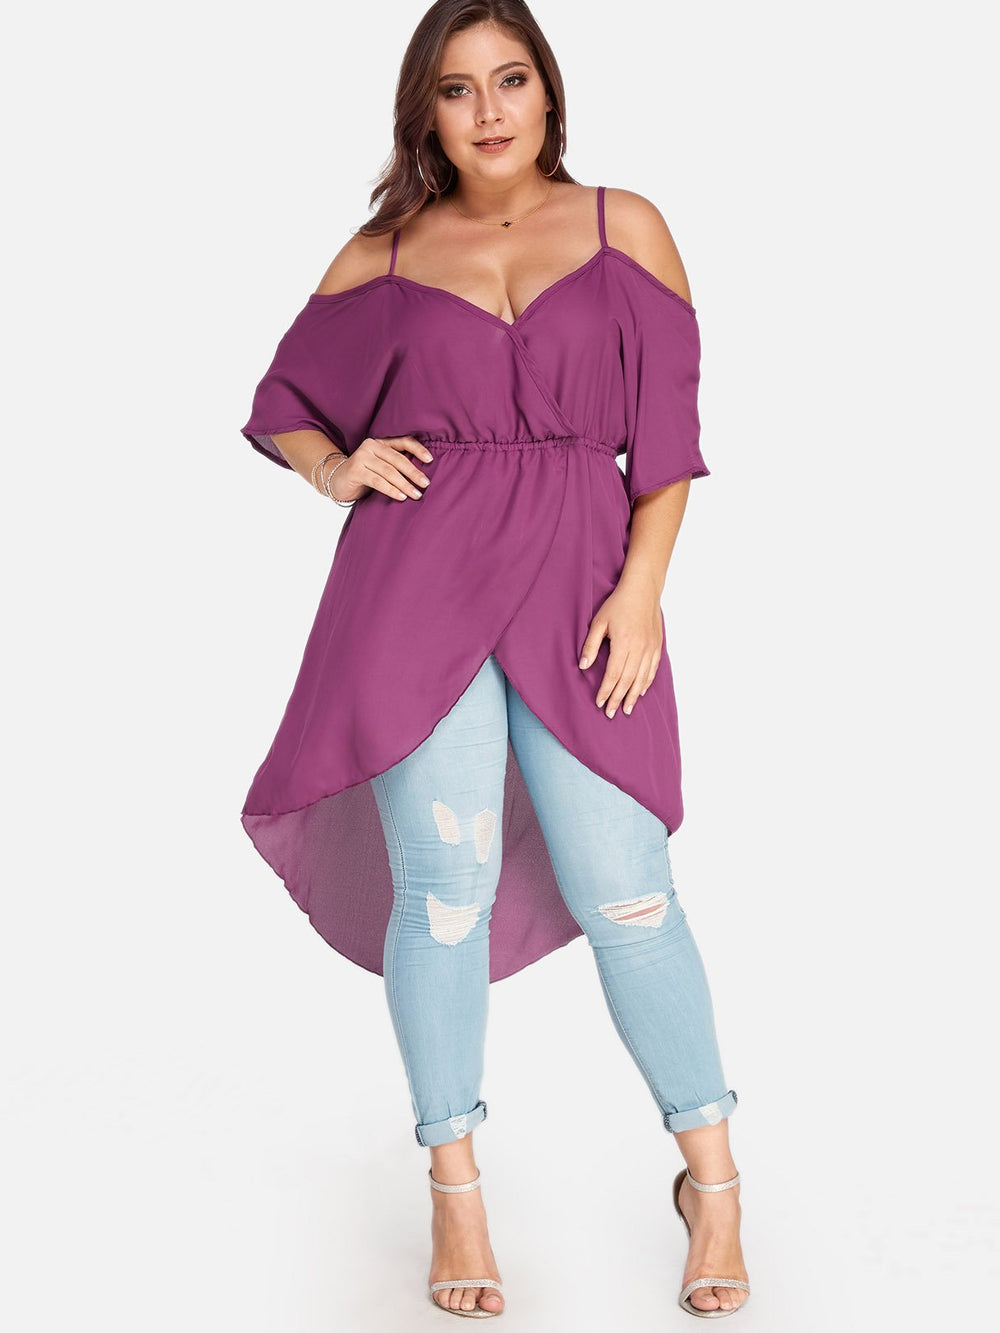 Womens Red Plus Size Tops